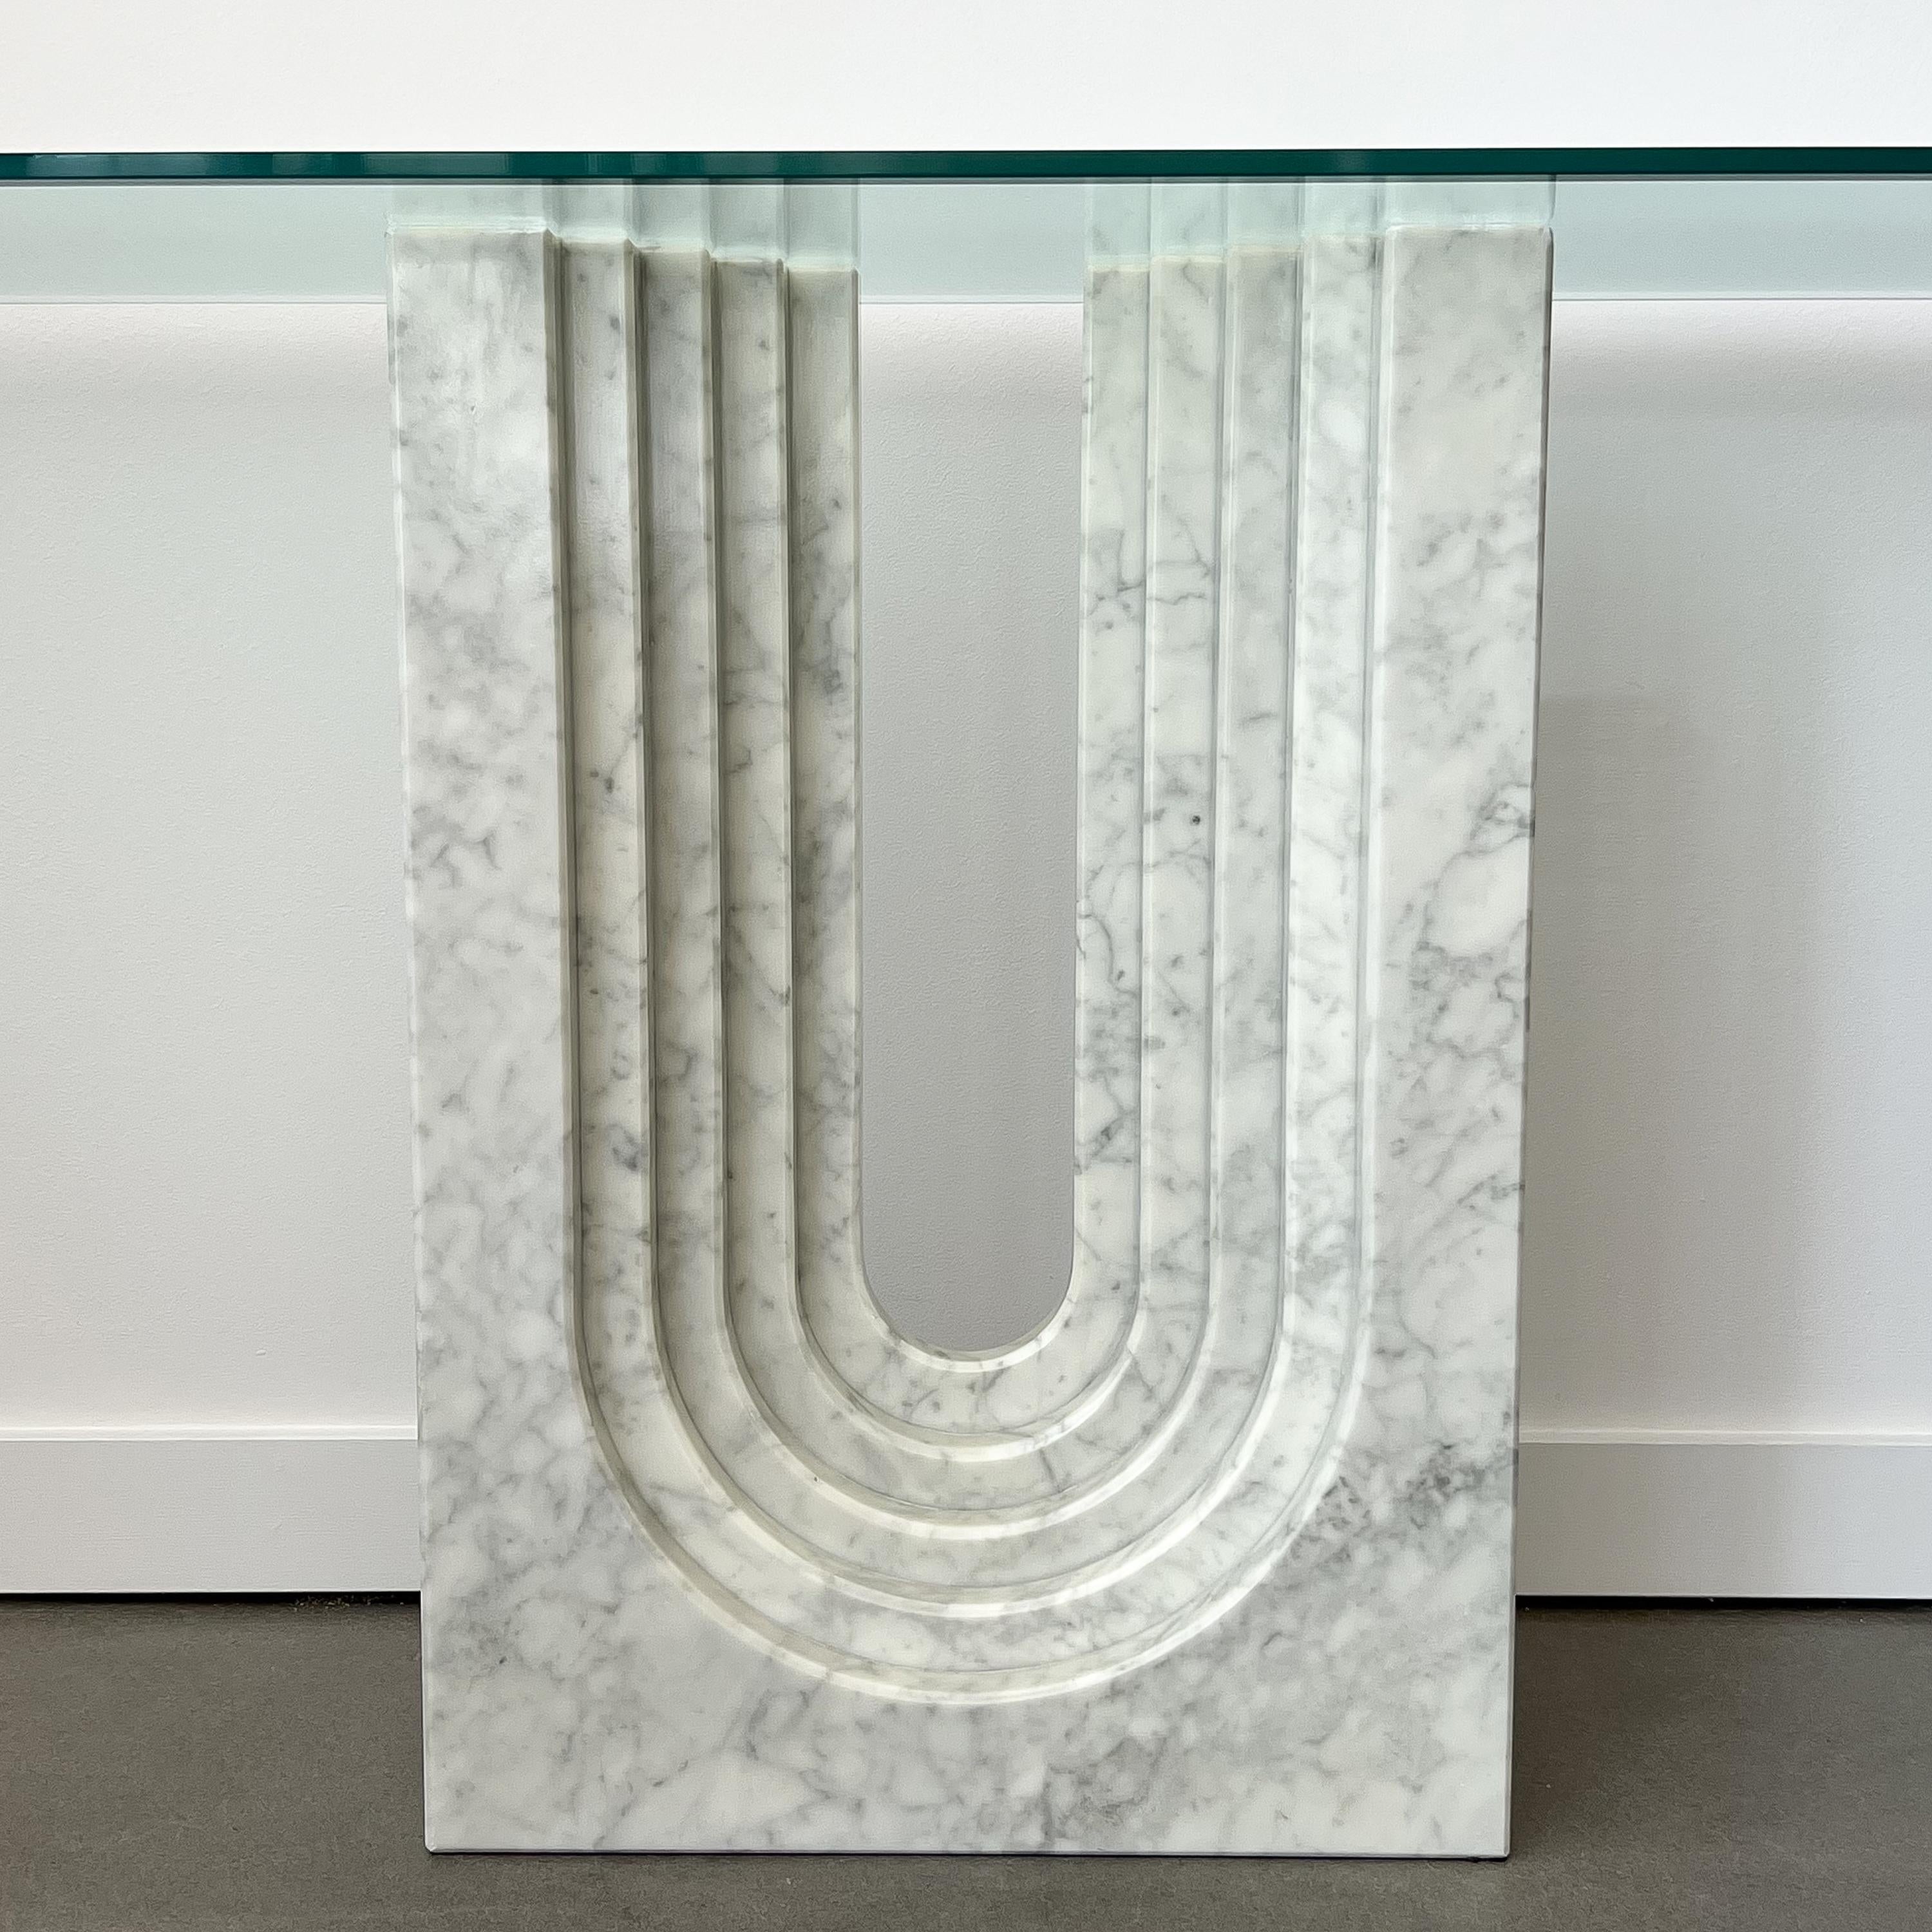 Late 20th Century Carlo Scarpa Modern Marble and Glass Console Table for Cattelan Italia